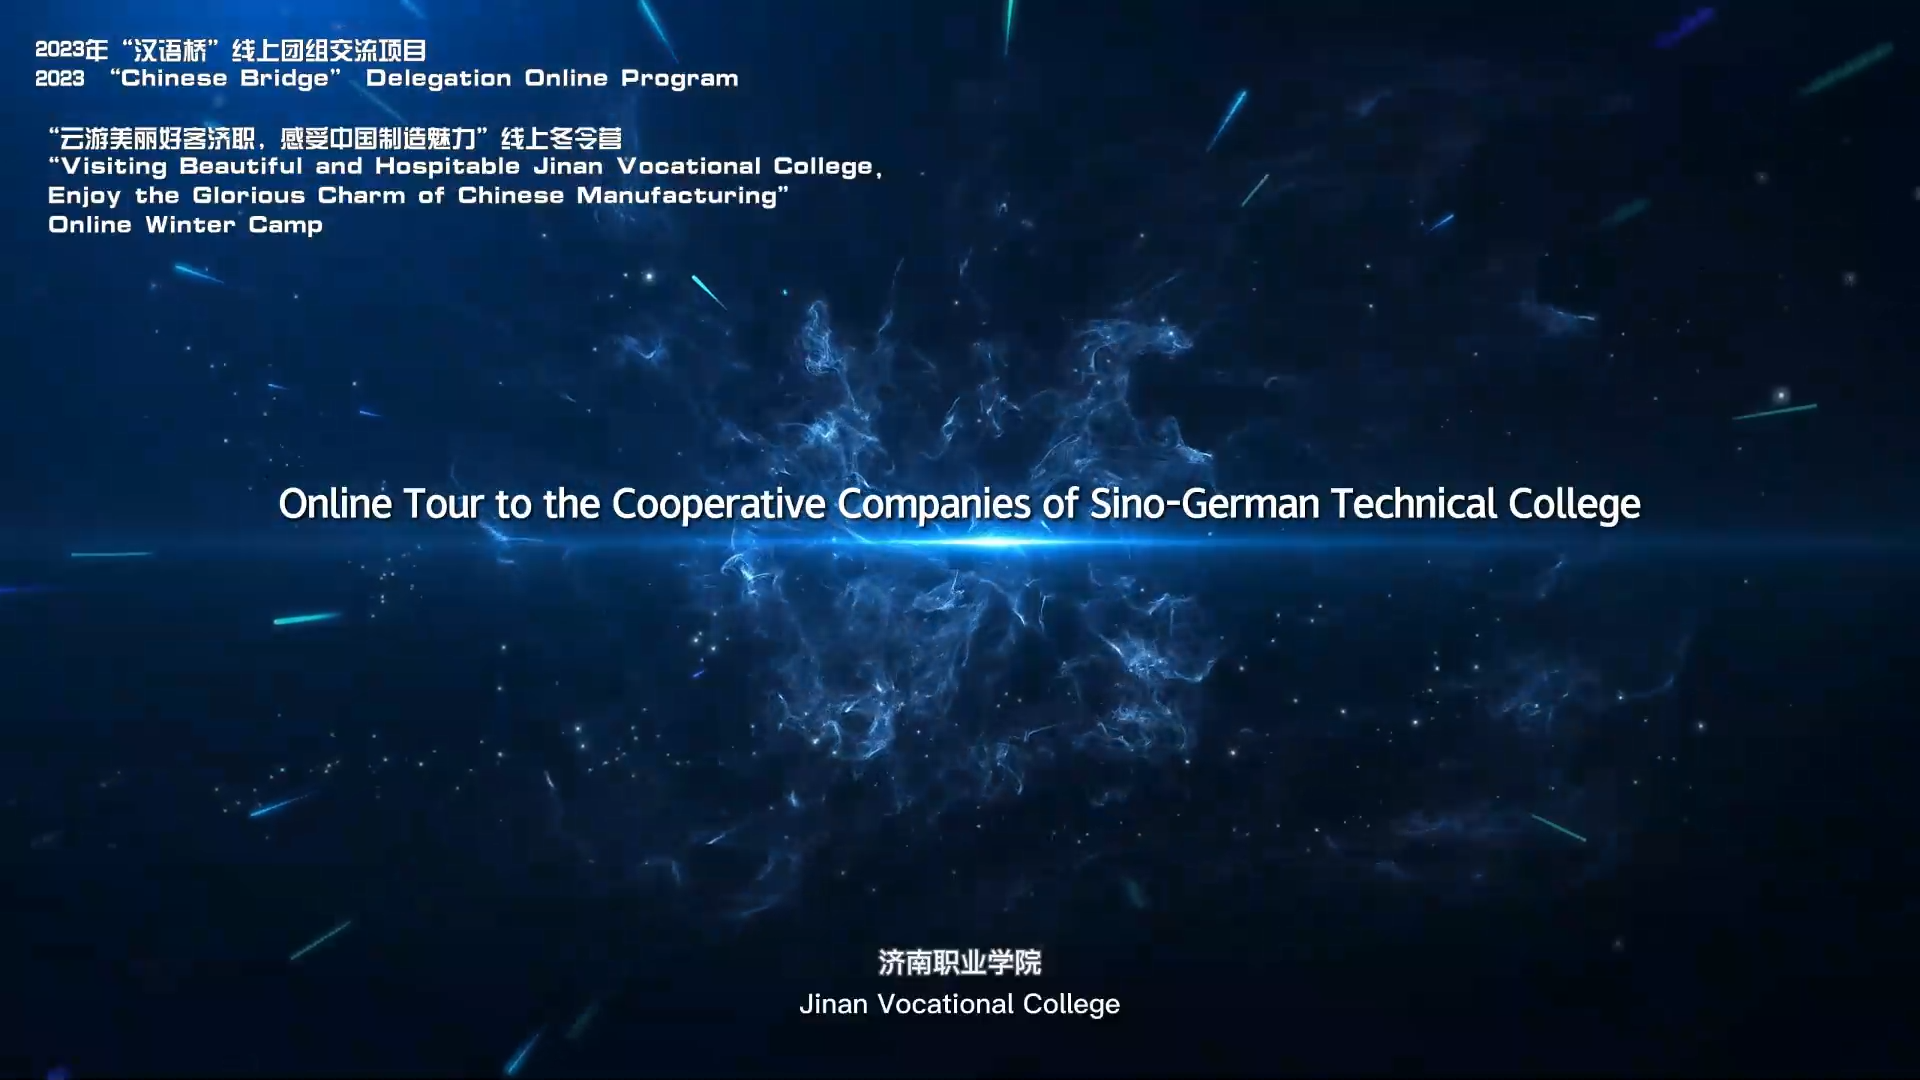 Online Tour to the Cooperative Companies of Sino-German Technical College